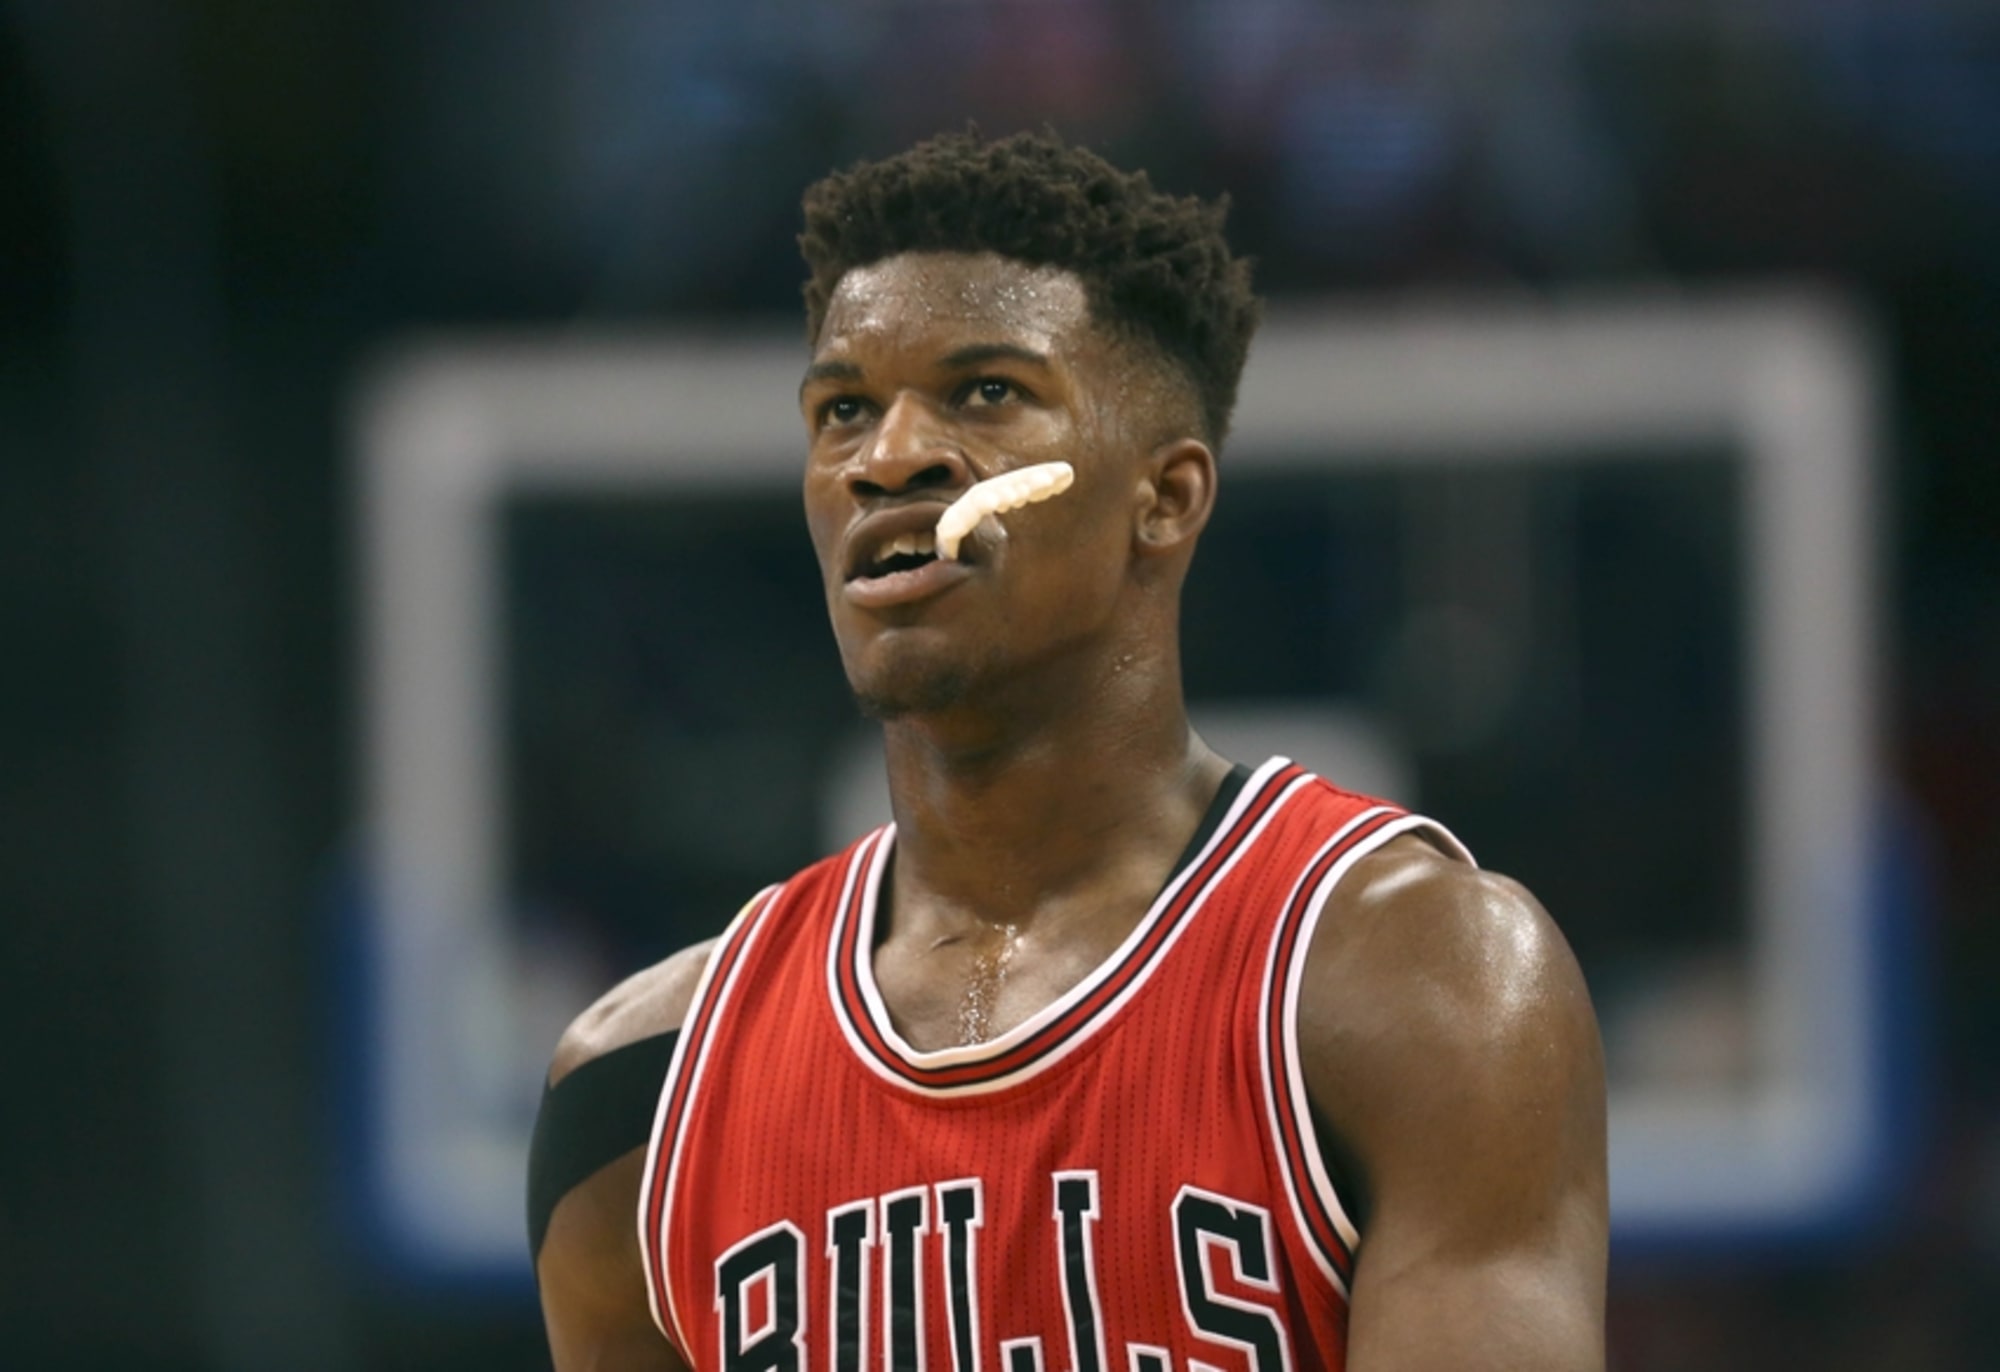 Jimmy Butler To Rare Genuine Most Improved Player